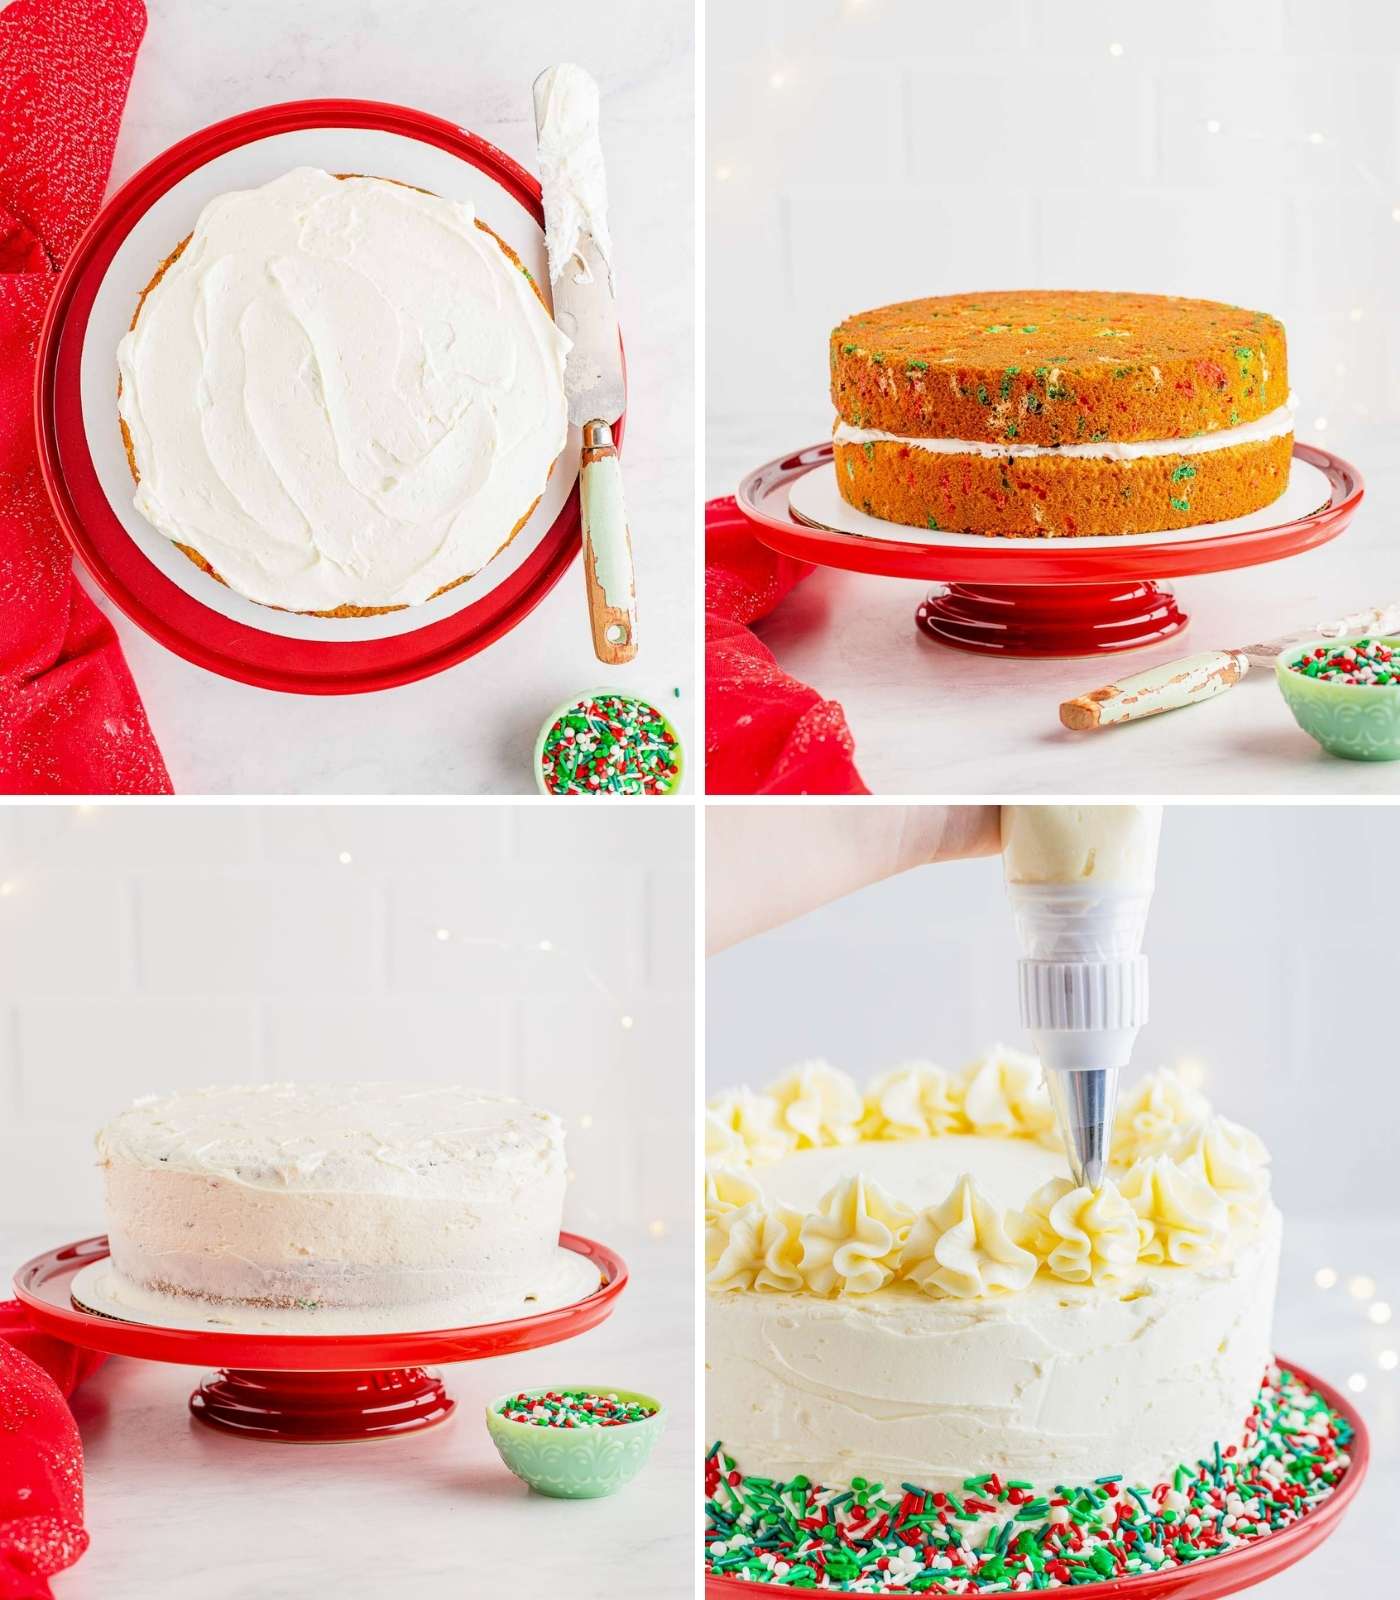 Collage of four images showing how to decorate a layer cake with vanilla buttercream